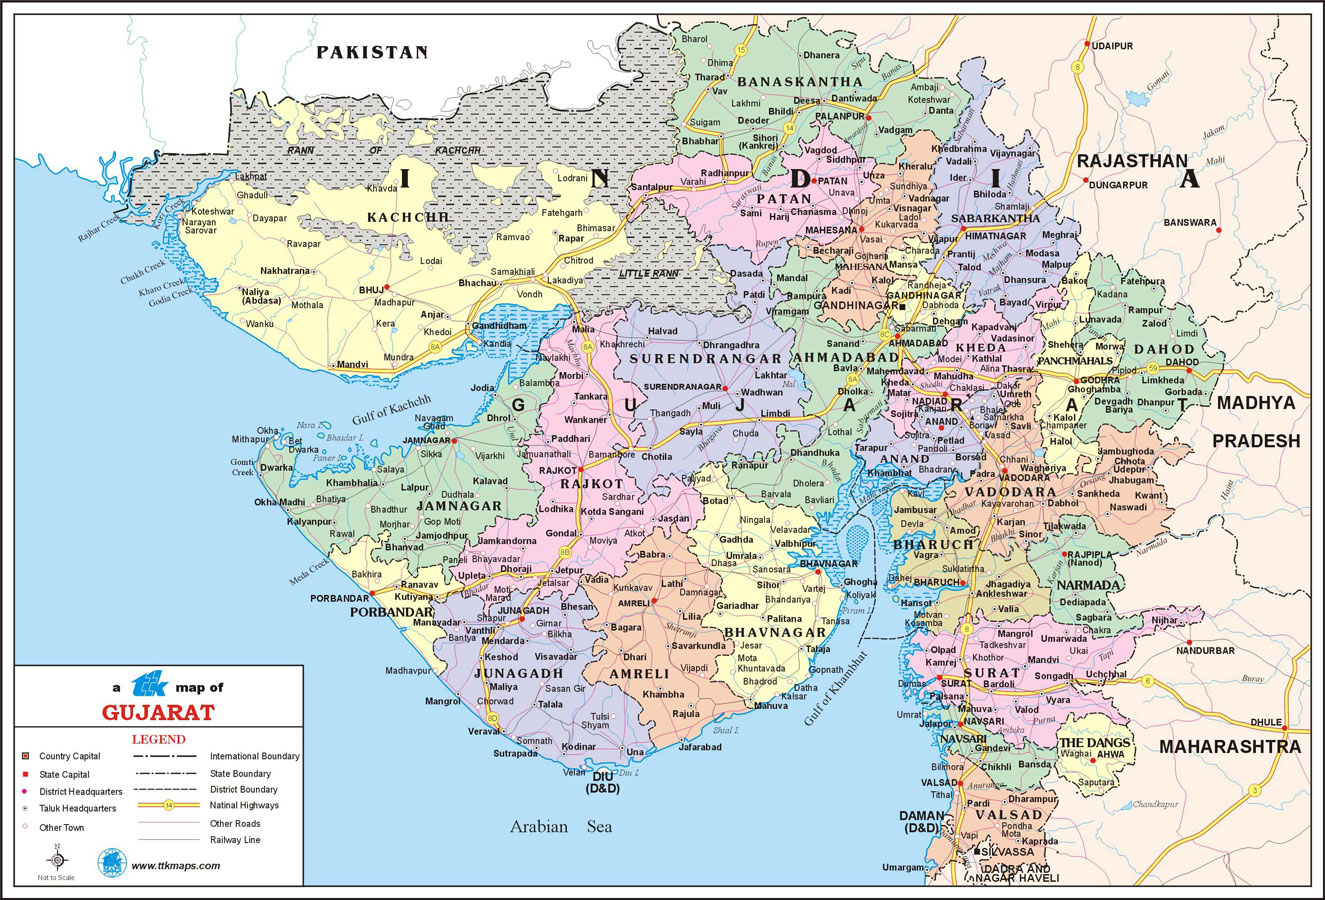 Map Of Gujarat And Rajasthan Gujarat Travel Map, Gujarat State Map With Districts, Cities, Towns,  Tourist Places @ Newkerala.com, India